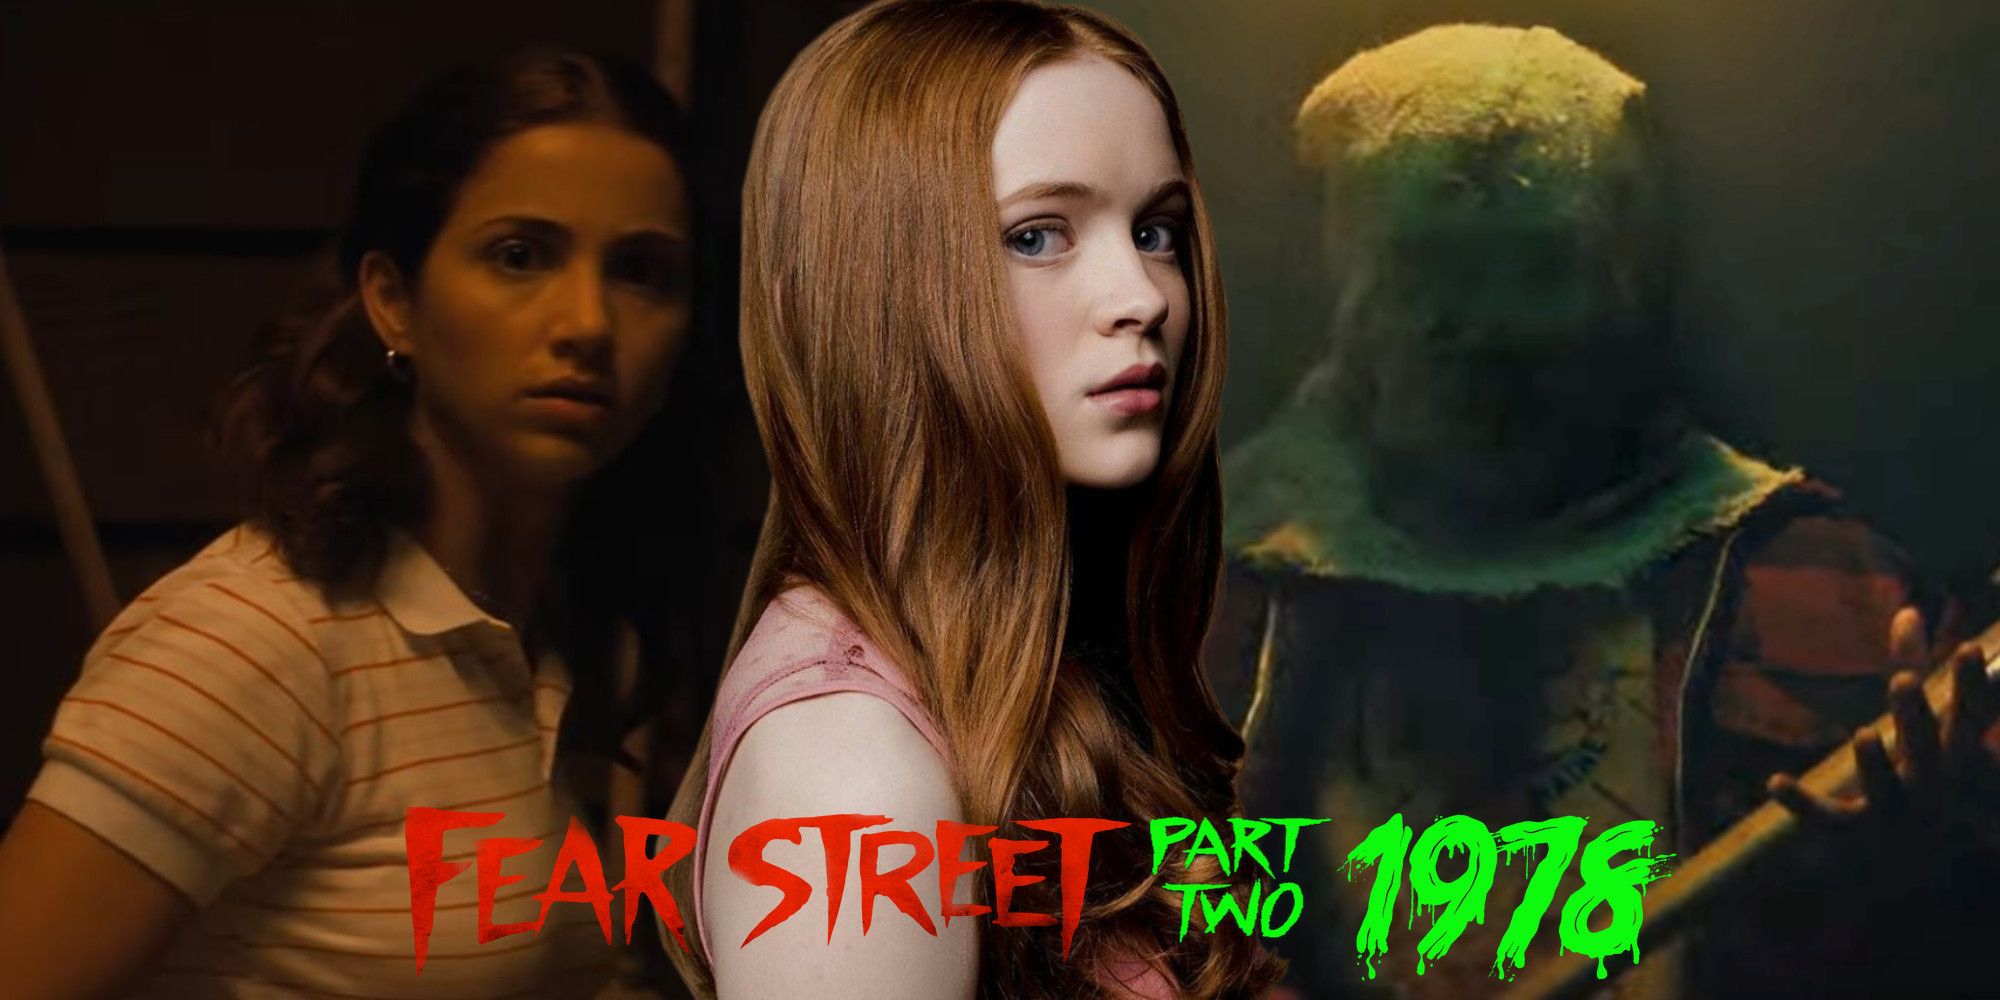 Emily Rudd as Cindy, Sadie Sink as Ziggy, and The Nightwing Killer in Fear Street Part 2 1978